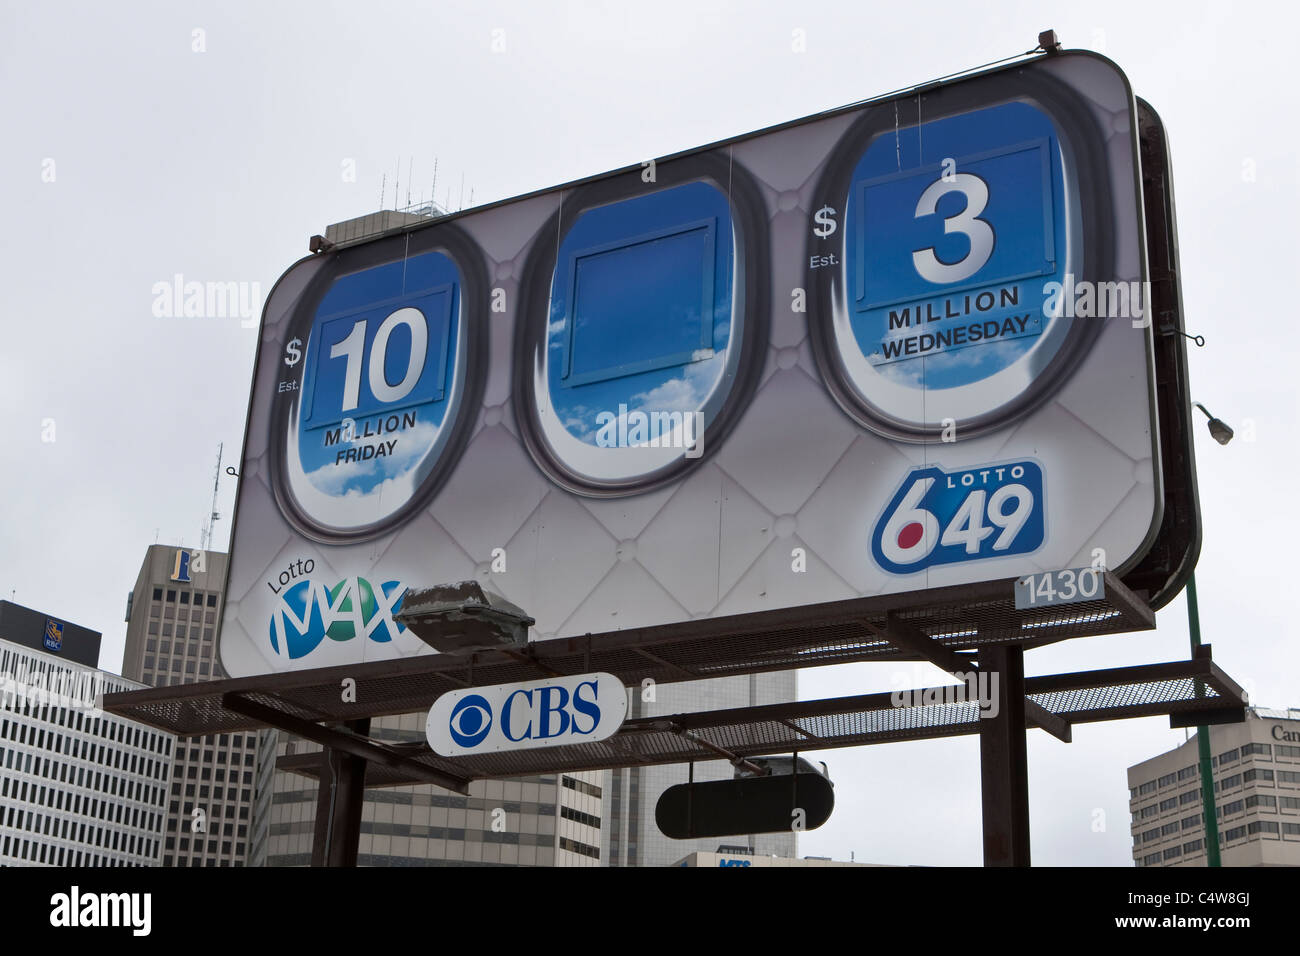 A CBS advertisement billboard for Lotto Max and Lotto 6/49 is pictured in Winnipeg Monday May 23, 2011. Stock Photo